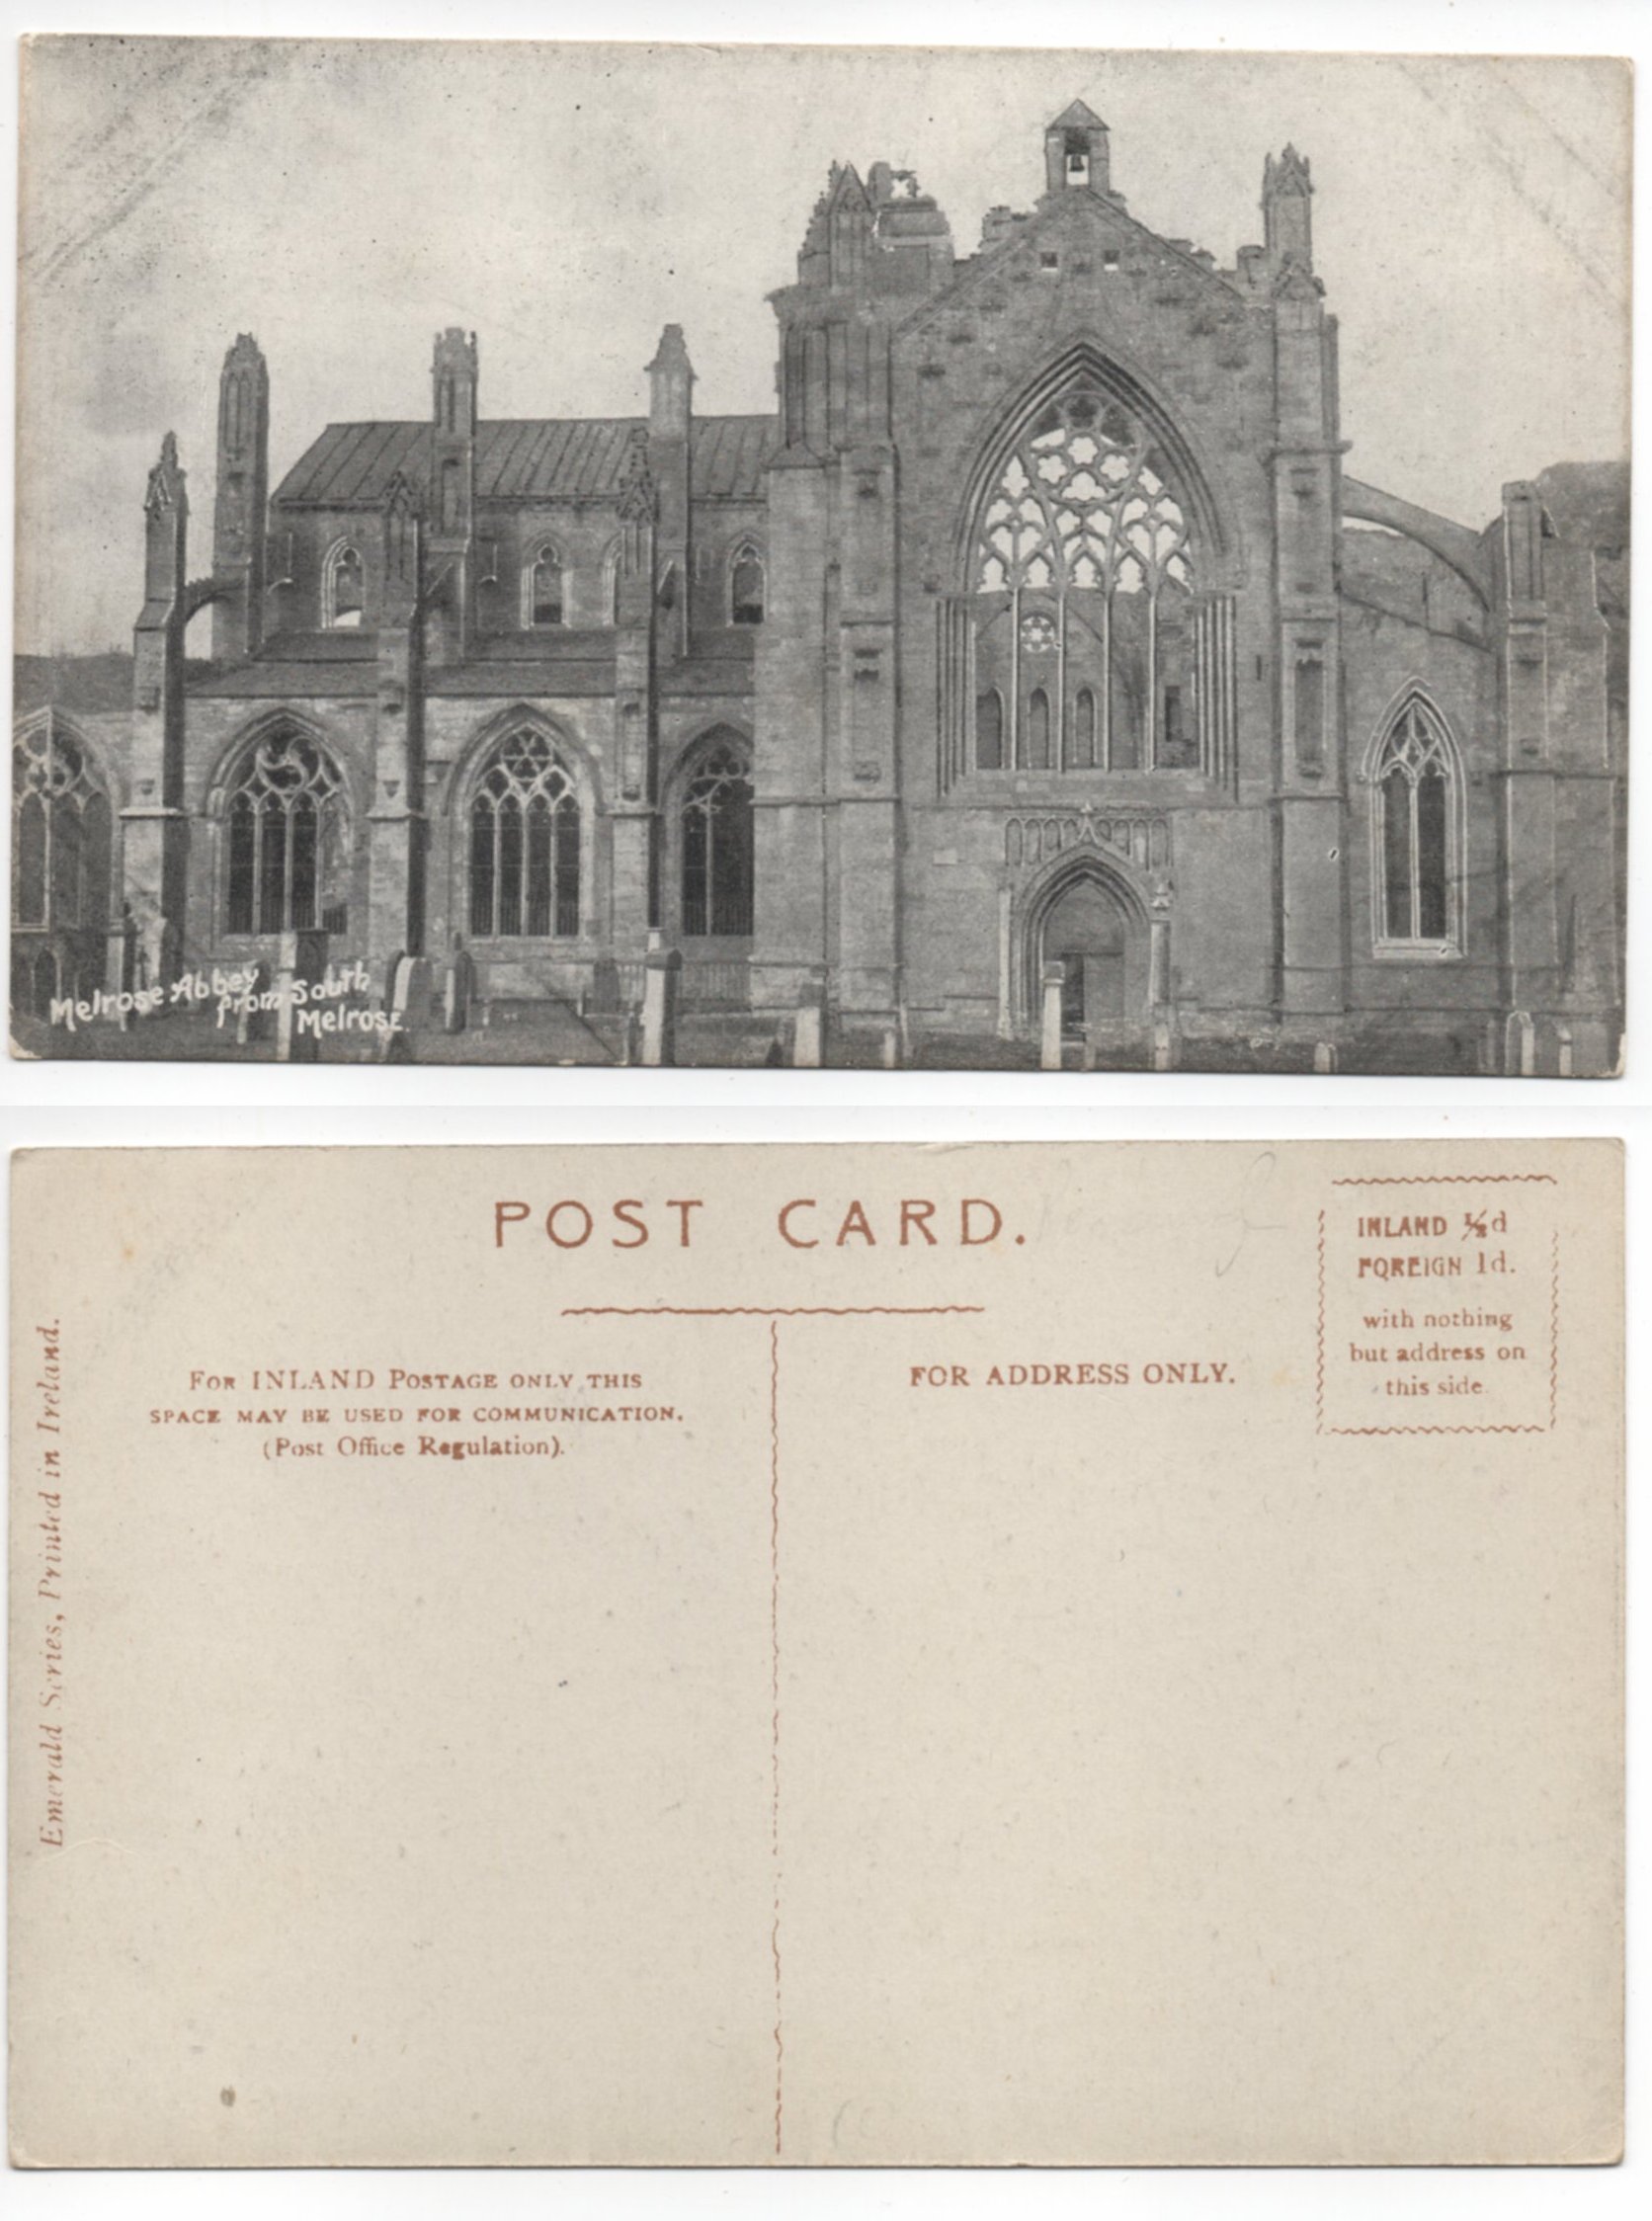 Melrose Abbey From South Melrose PW047.jpg  by whitetaylor